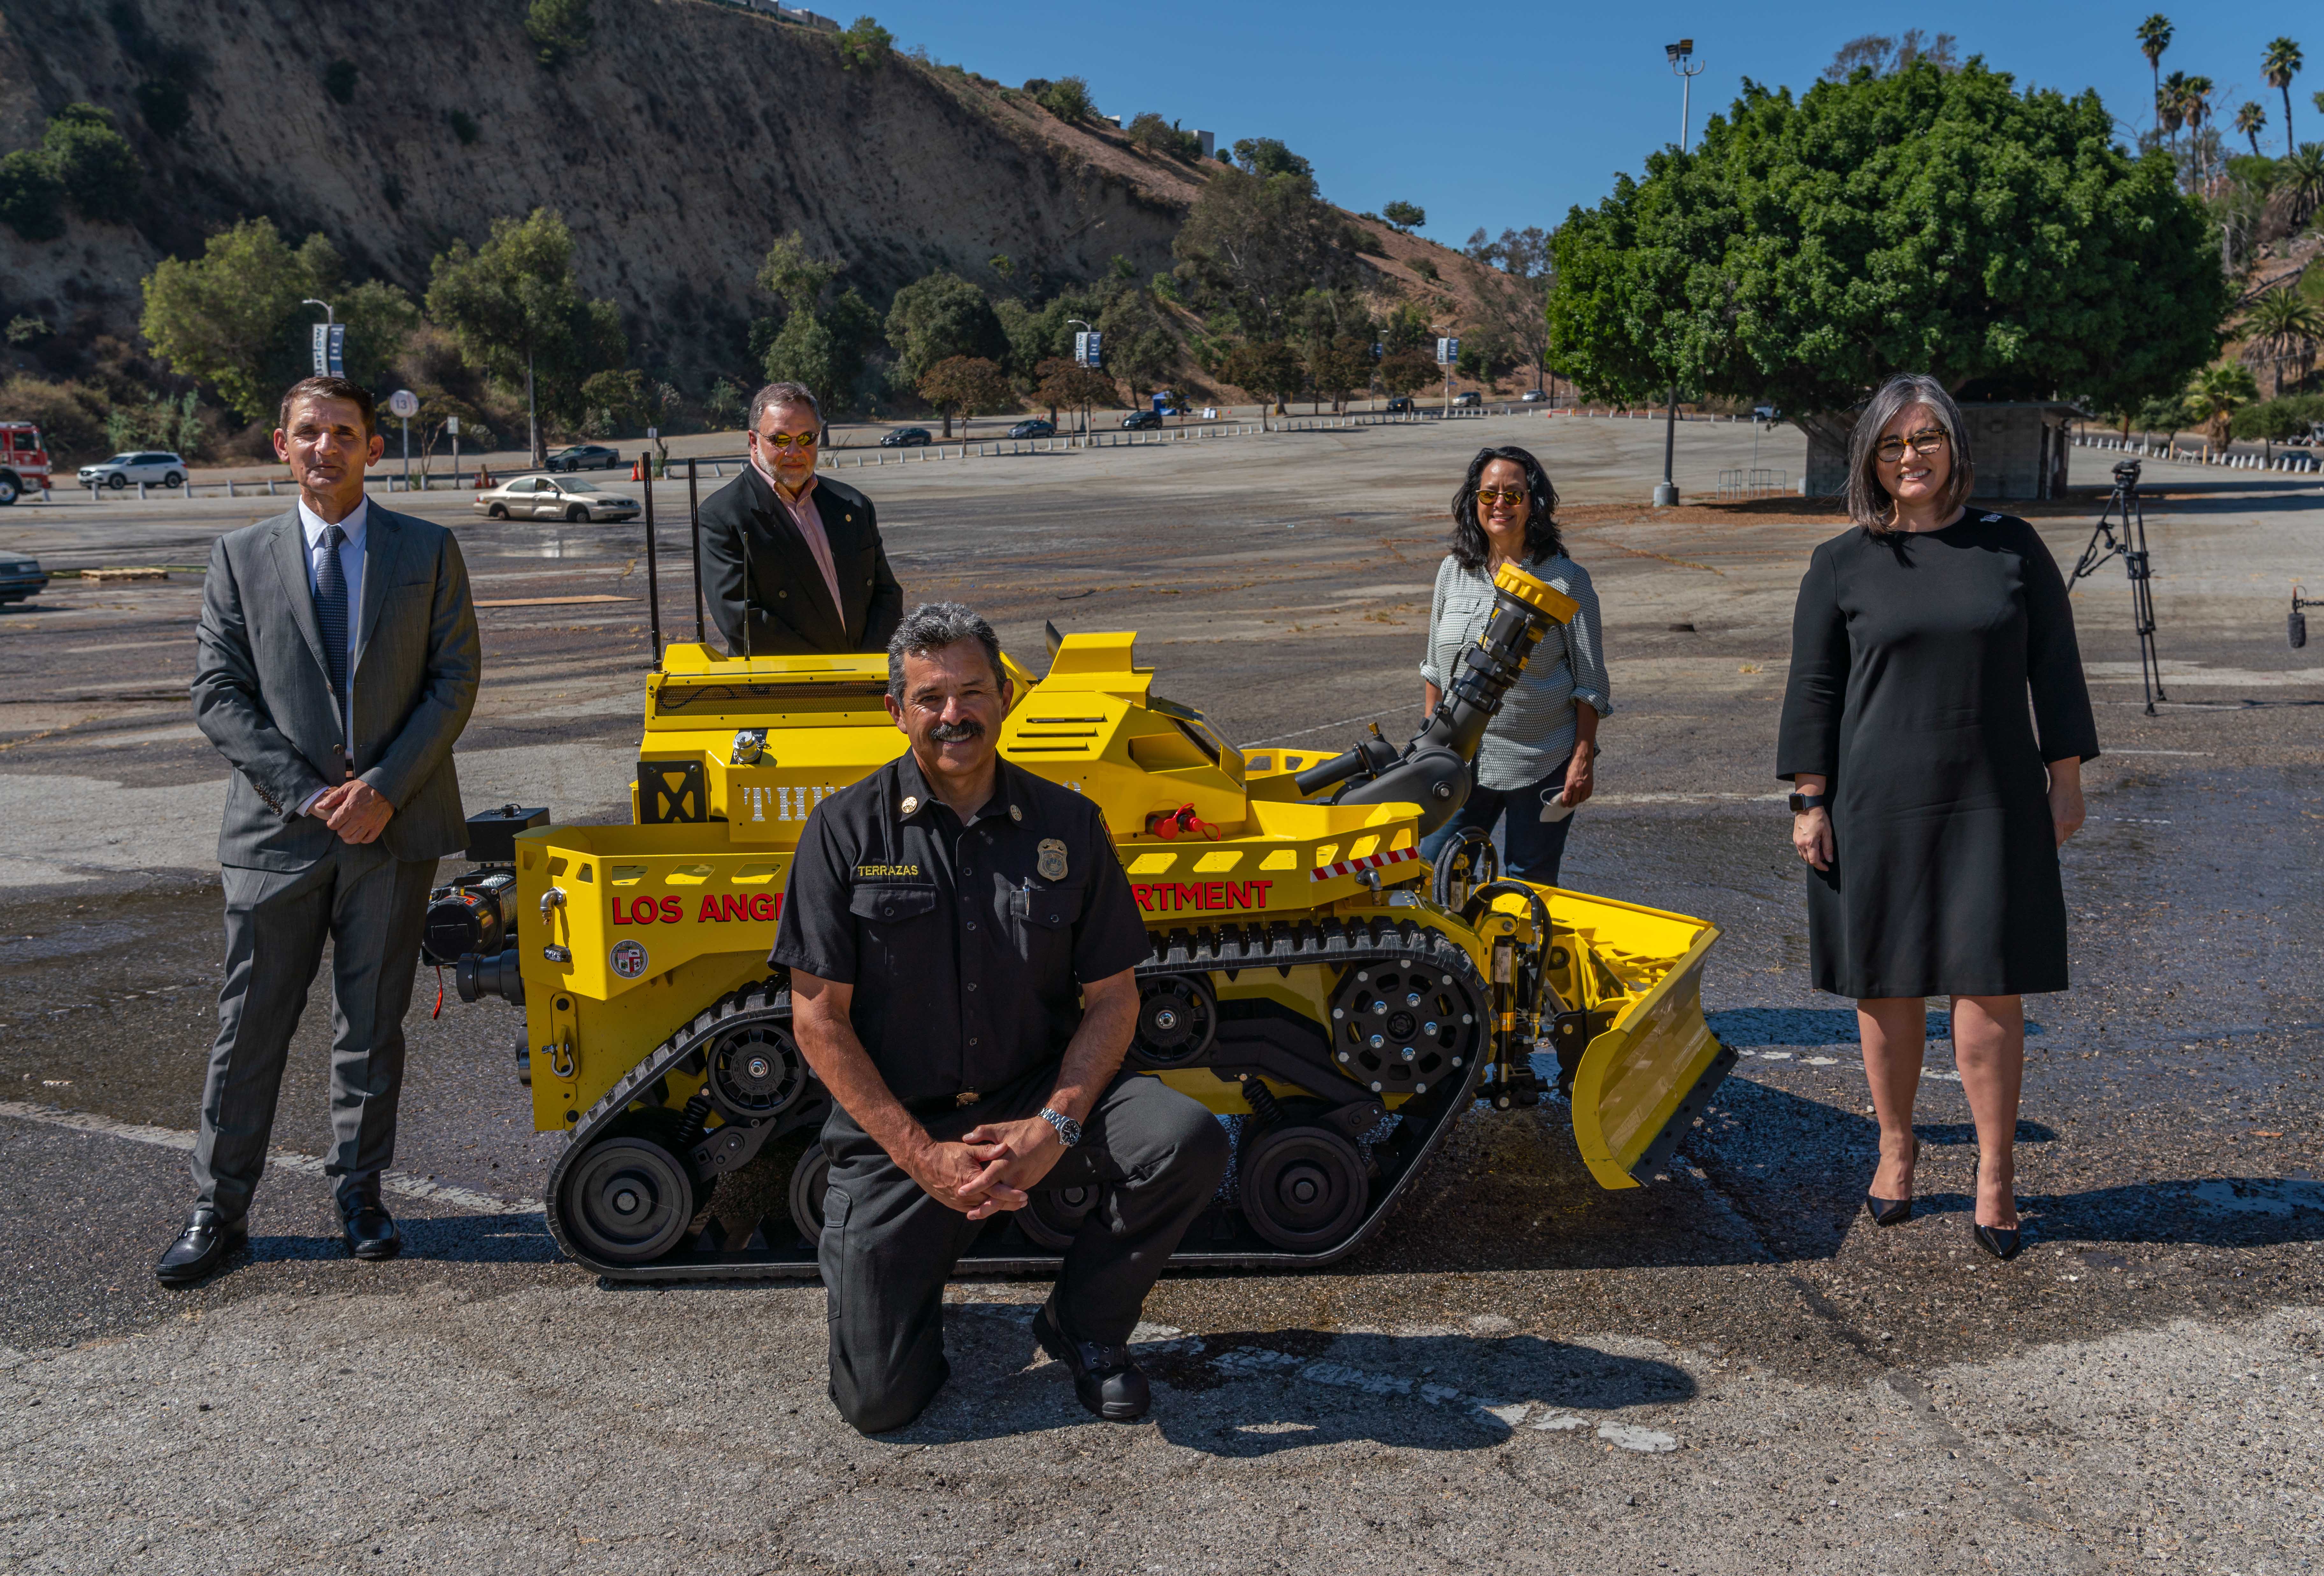 Fire Chief and city officials standing with the yellow, robotic firefighting vehicle - a compact tracked vehicle